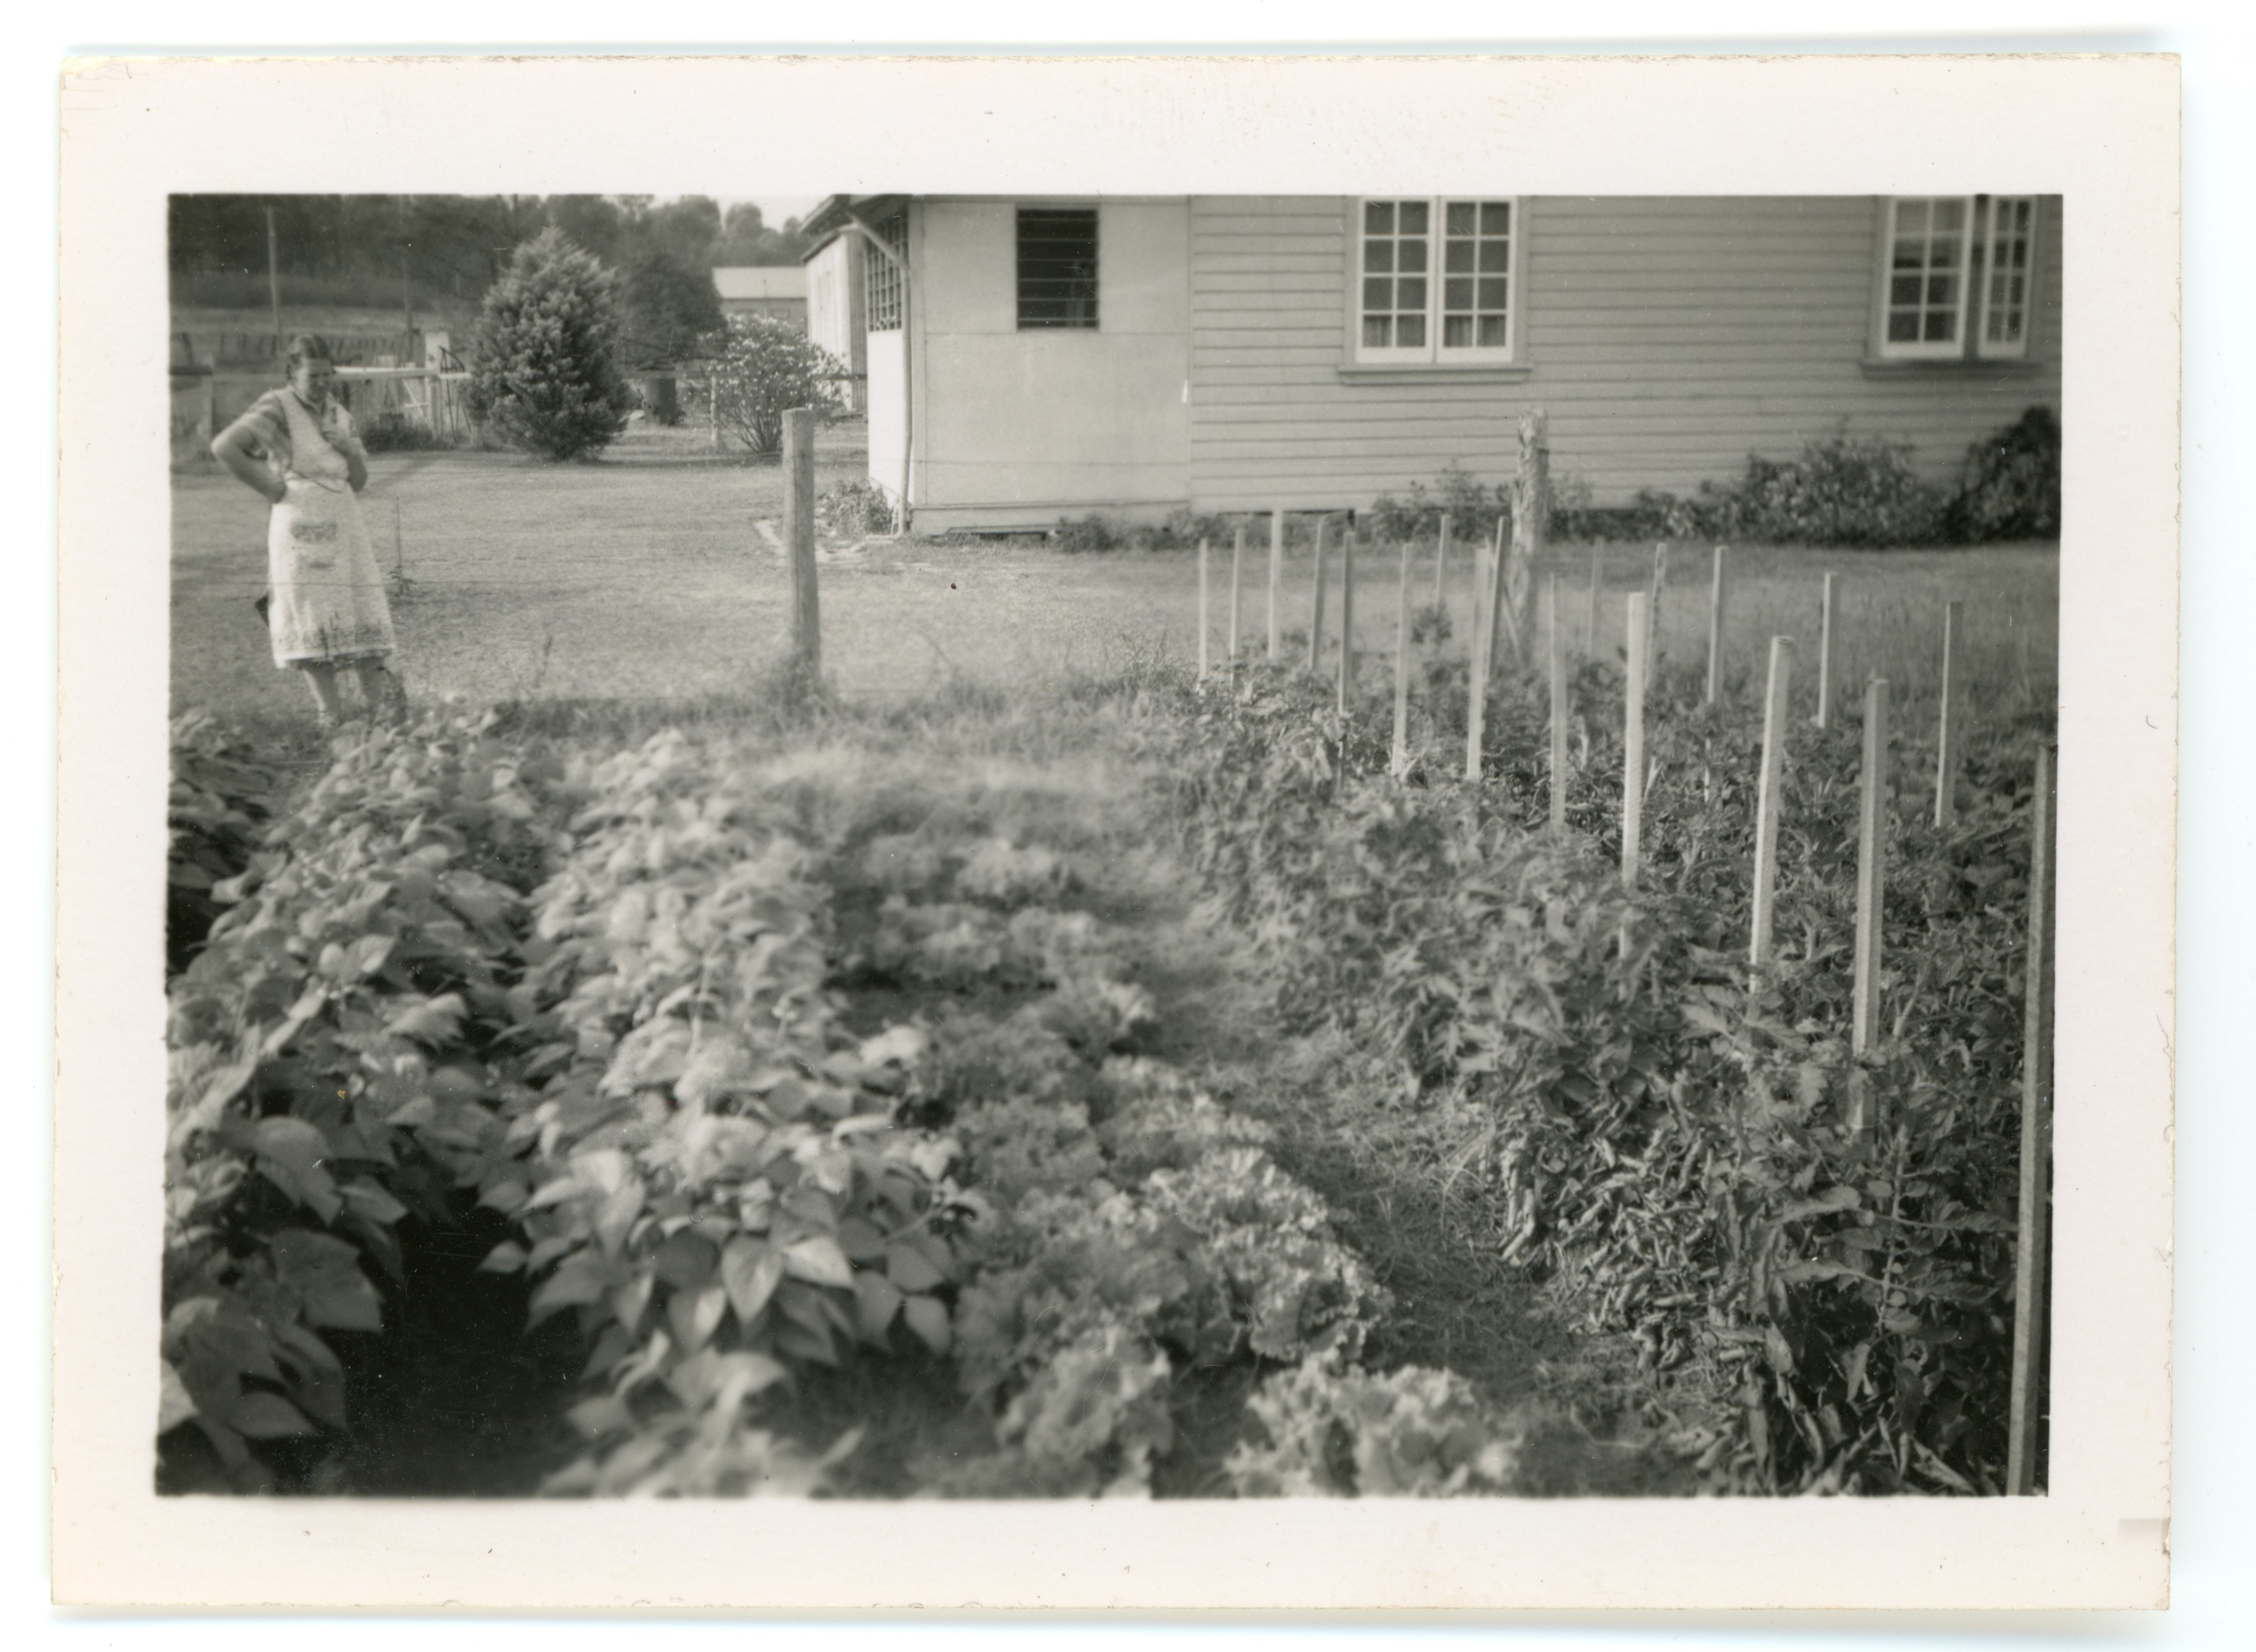 Vegetable patch in the backyard of 21 West Street